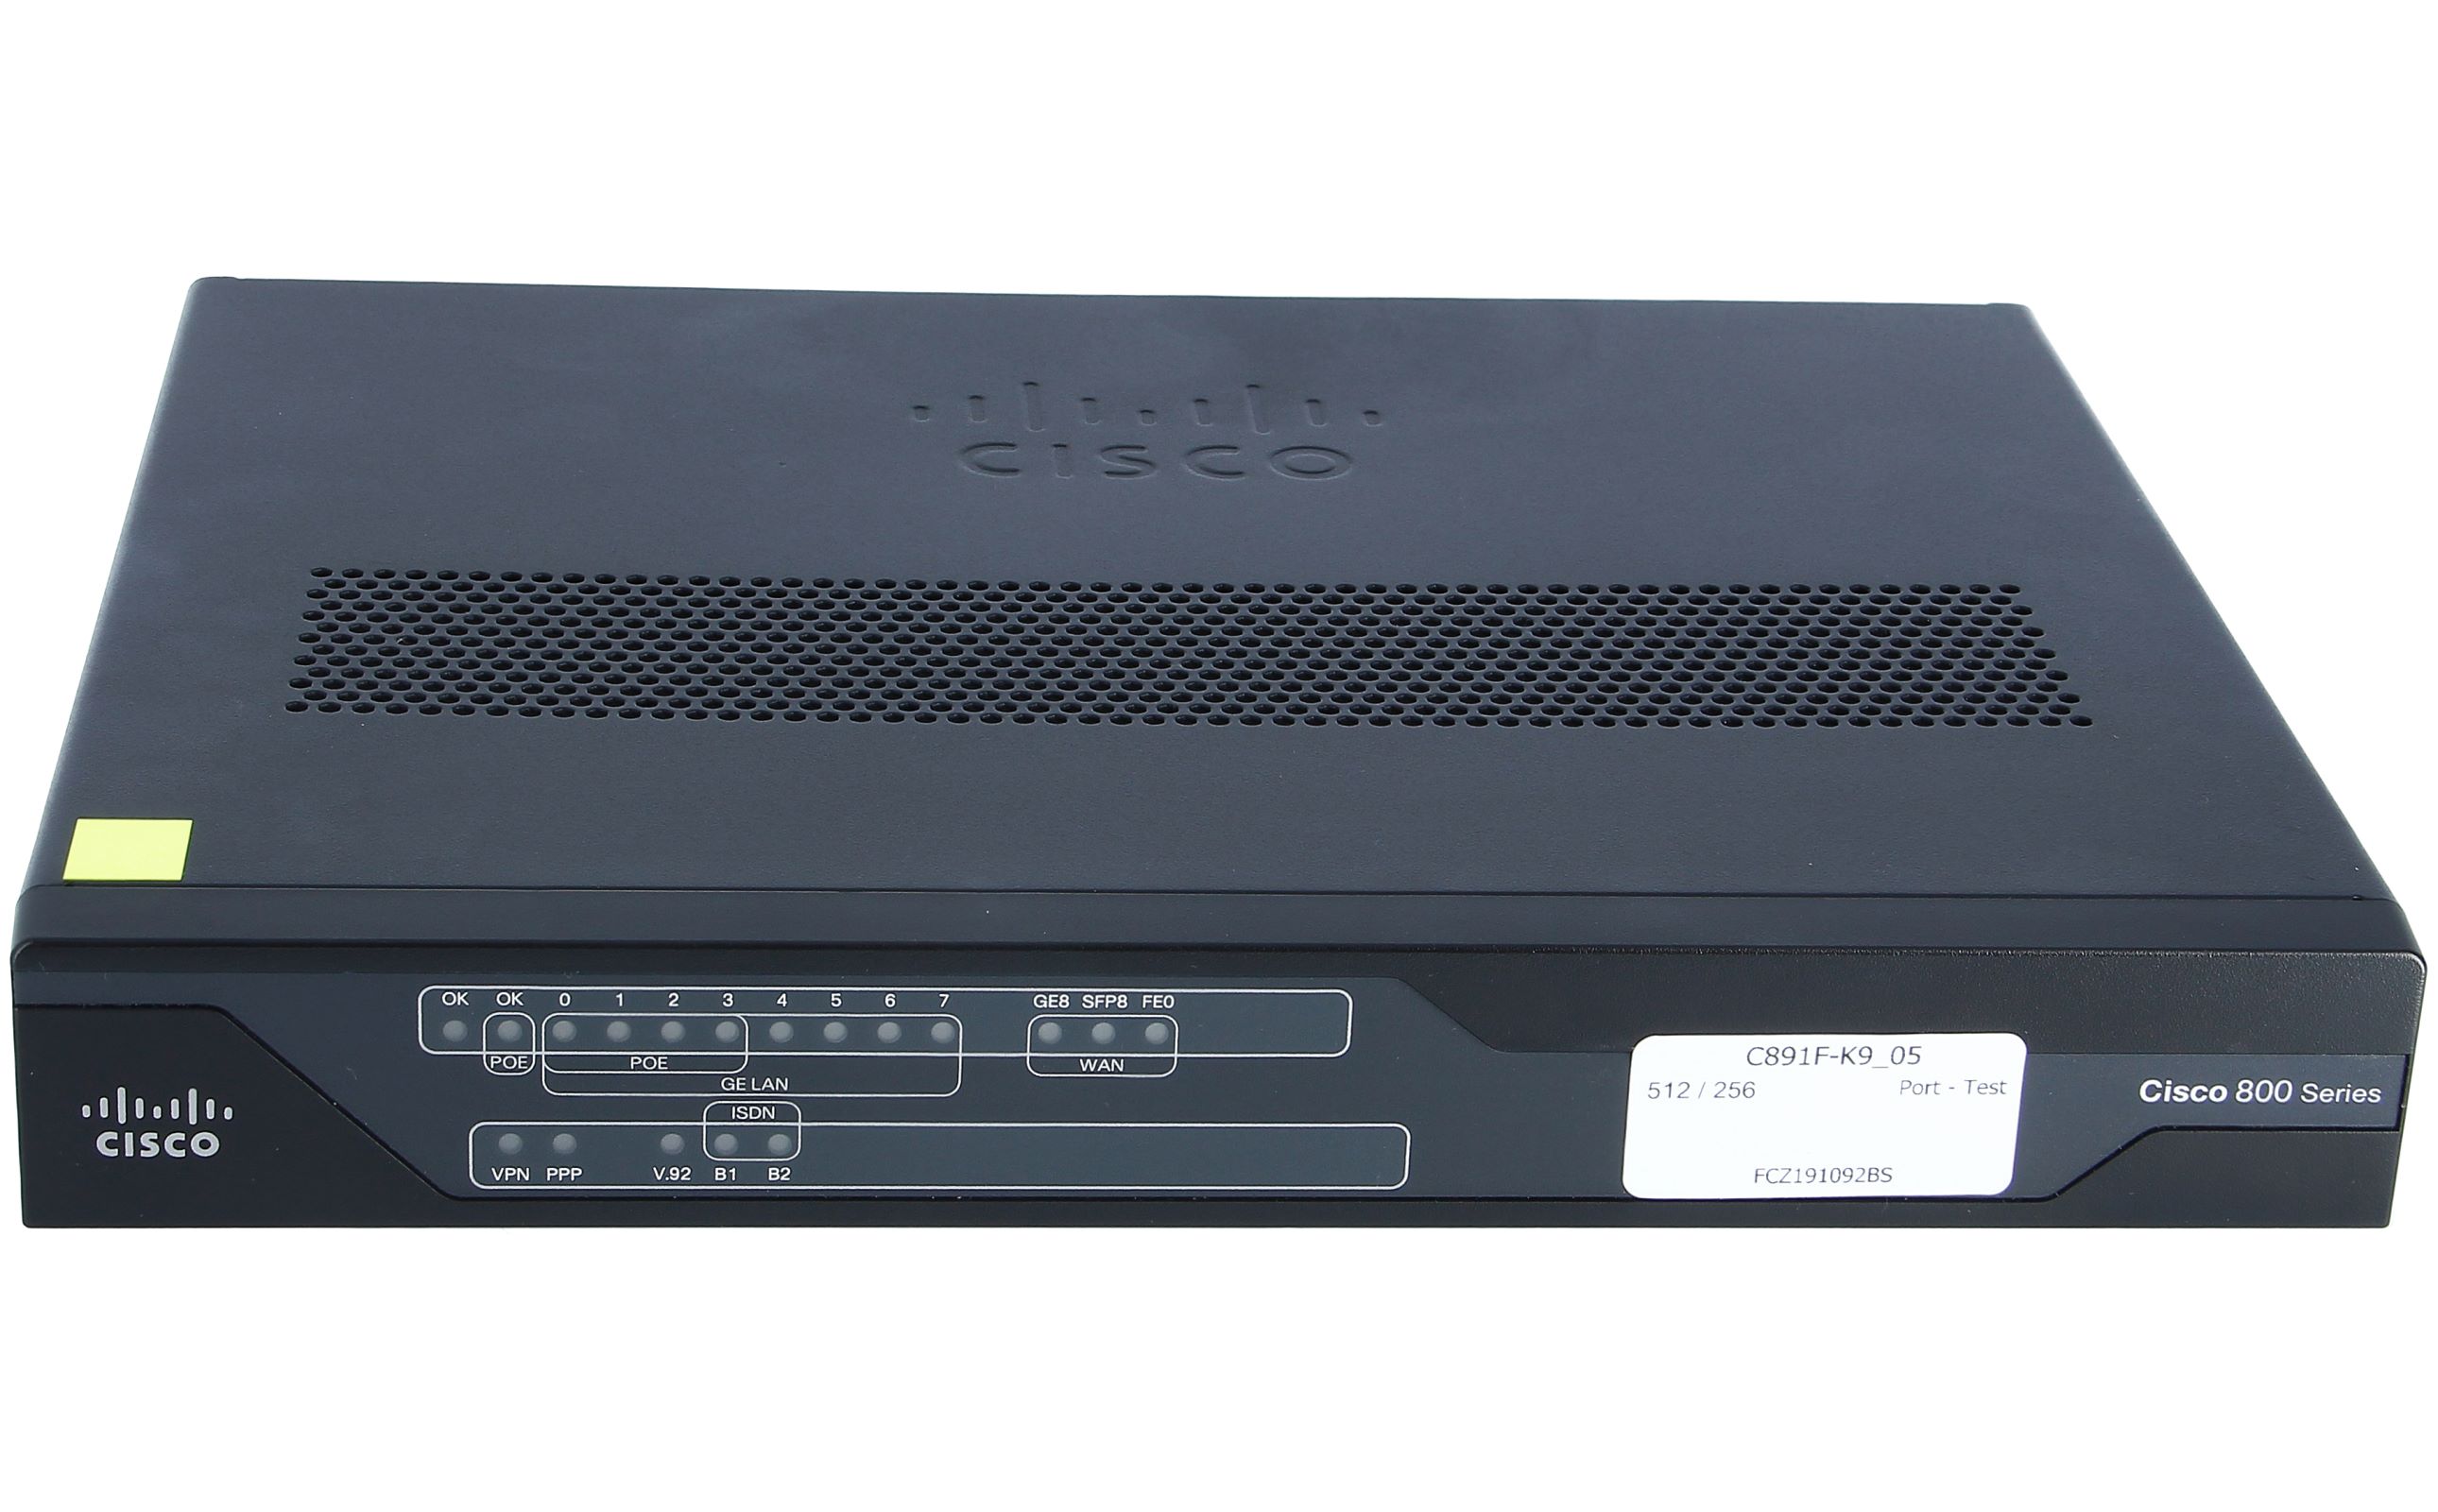 Cisco - Cisco 890 Series Integrated Services Routers new and refurbished buy online prices